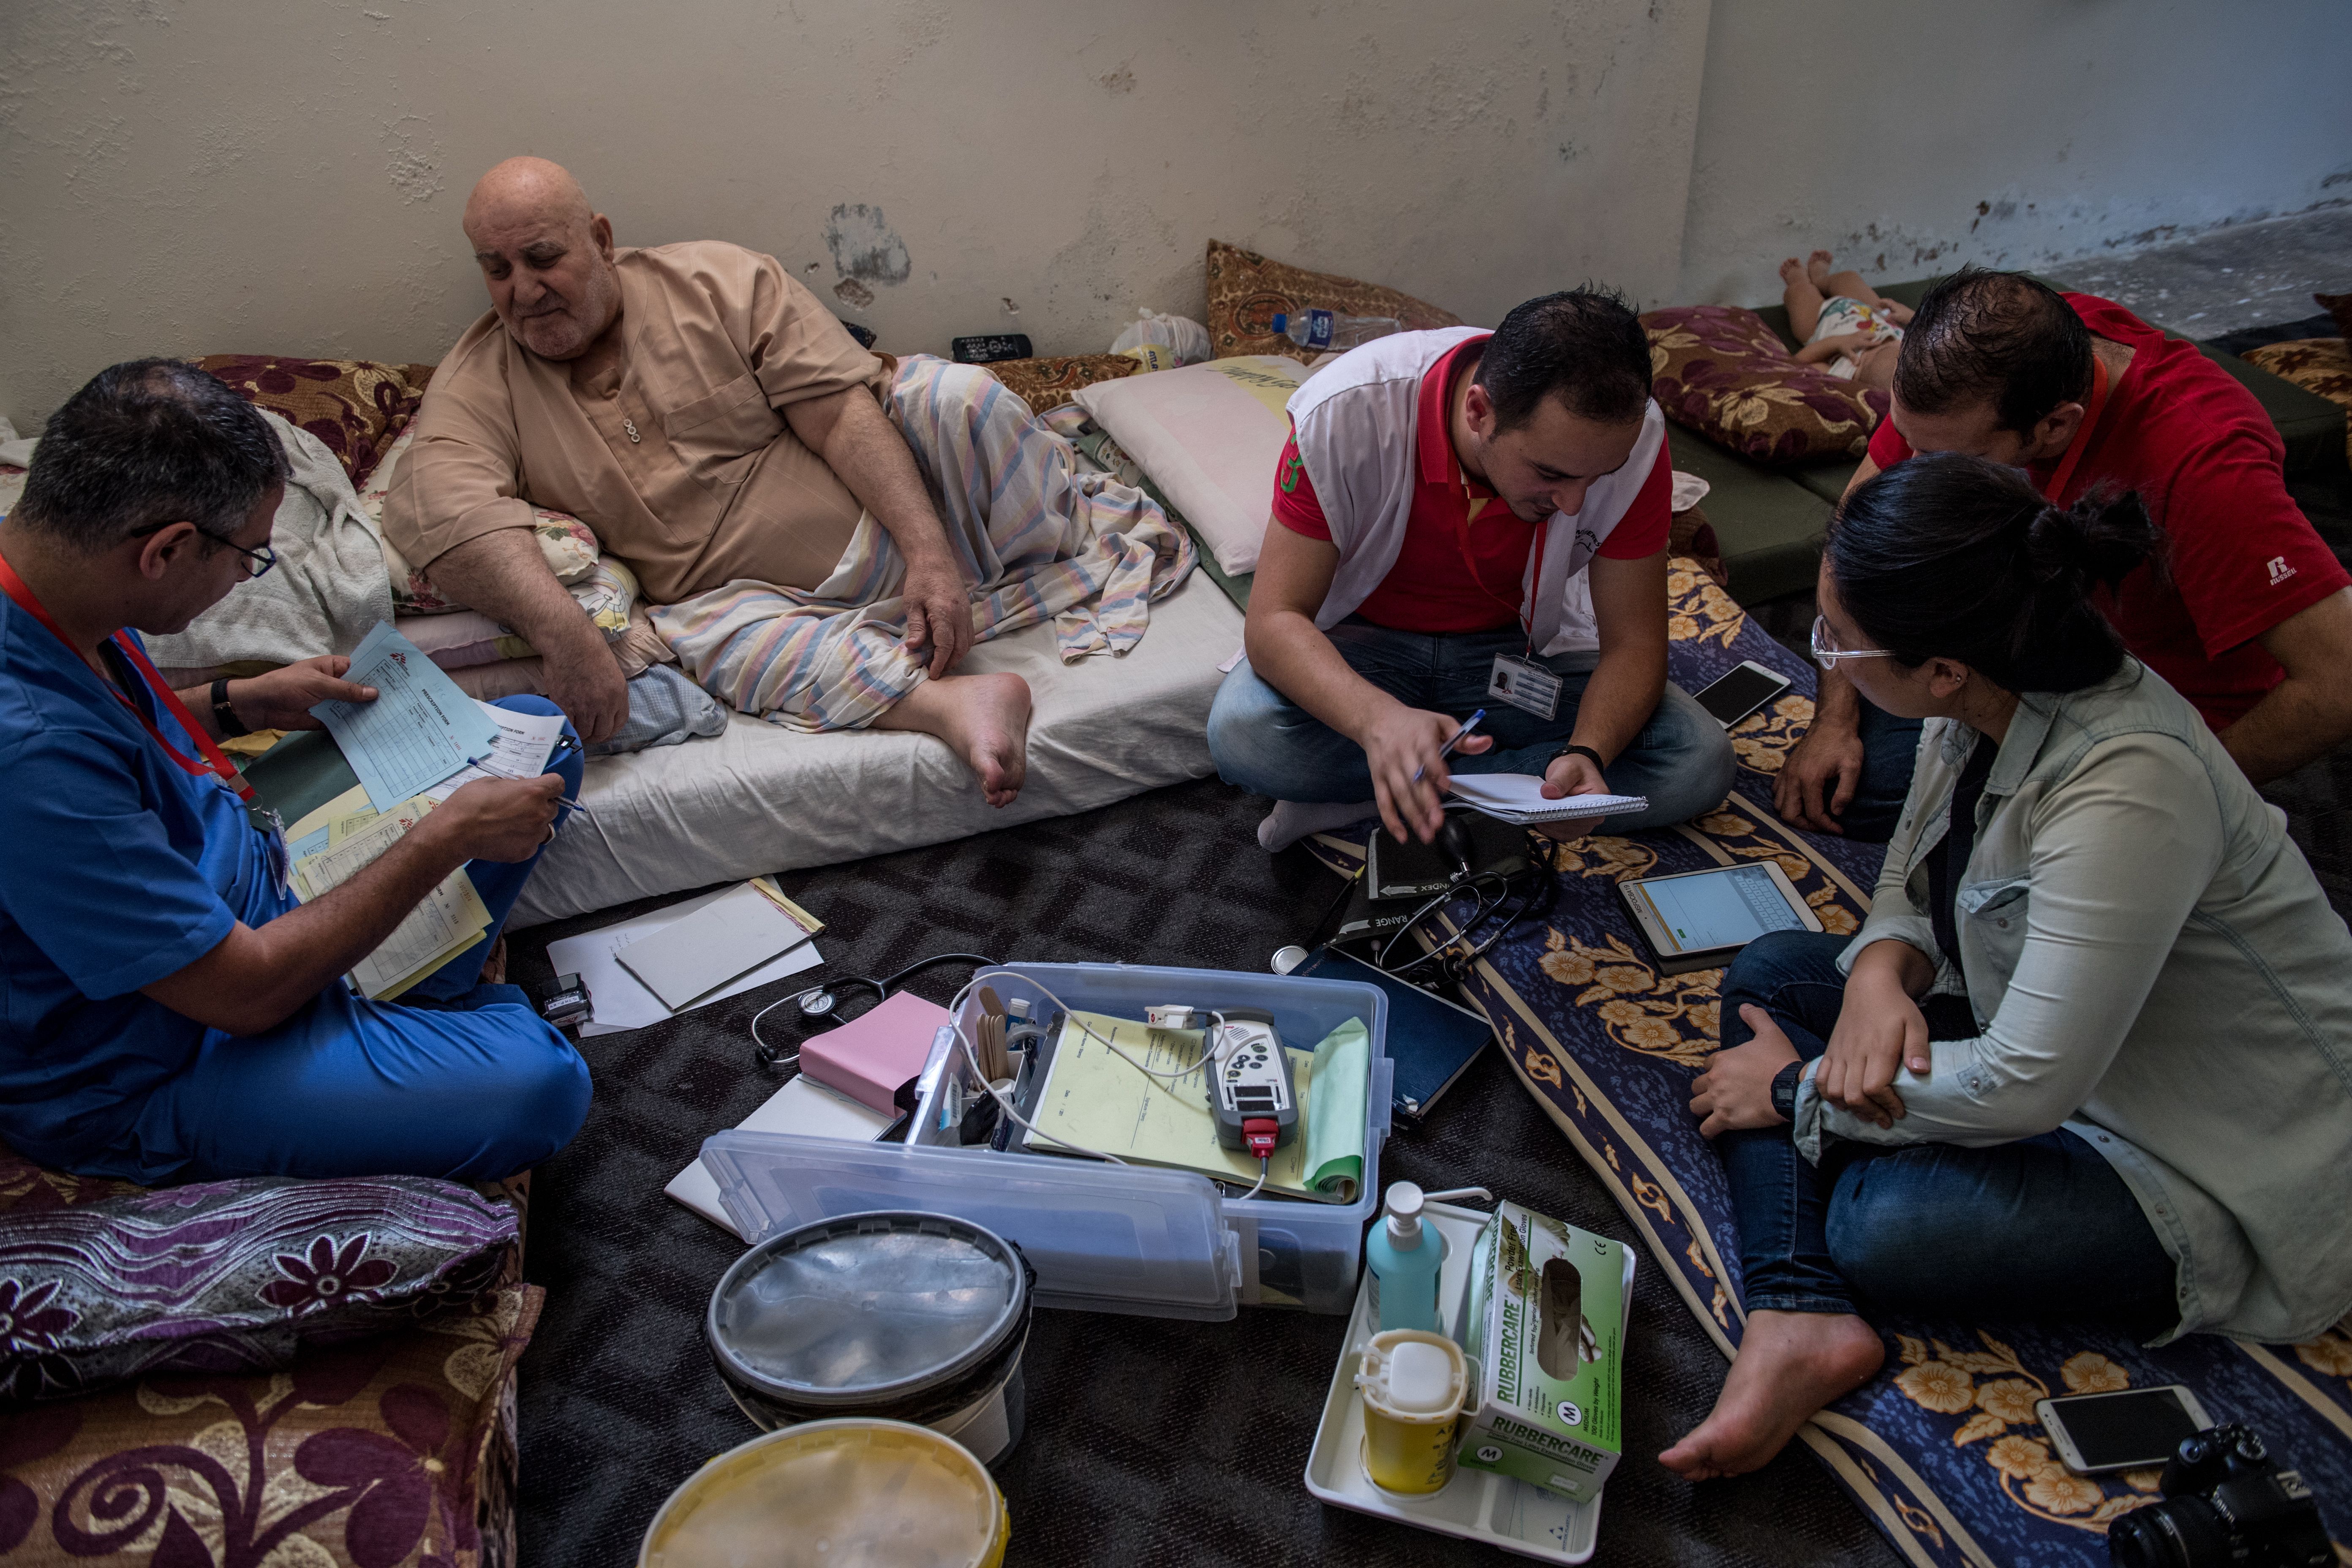 A doctor from Médecins Sans Frontières speaks with Ibrahim Hassan, a Syrian refugee living in Northern Jordan. Staff from the Dharma Platform collect information and prepare to deploy new data-collection technology along the Syrian border. Image by Neil Brandvold. Jordan, 2017.